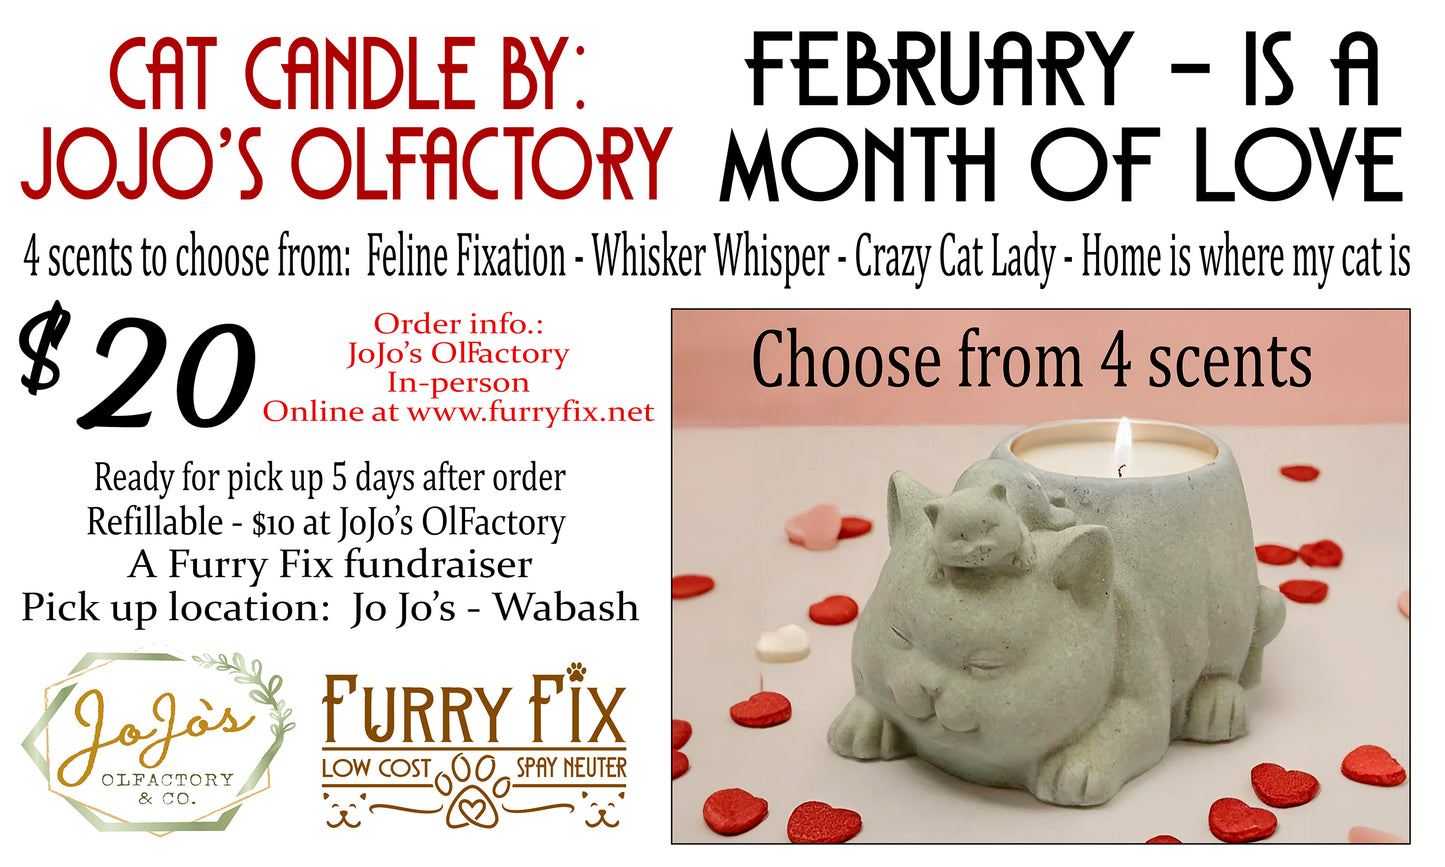 Cat candle!  So awesome!  Fundraiser for Furry Fix - ready in 5 days - pick up in Wabash.